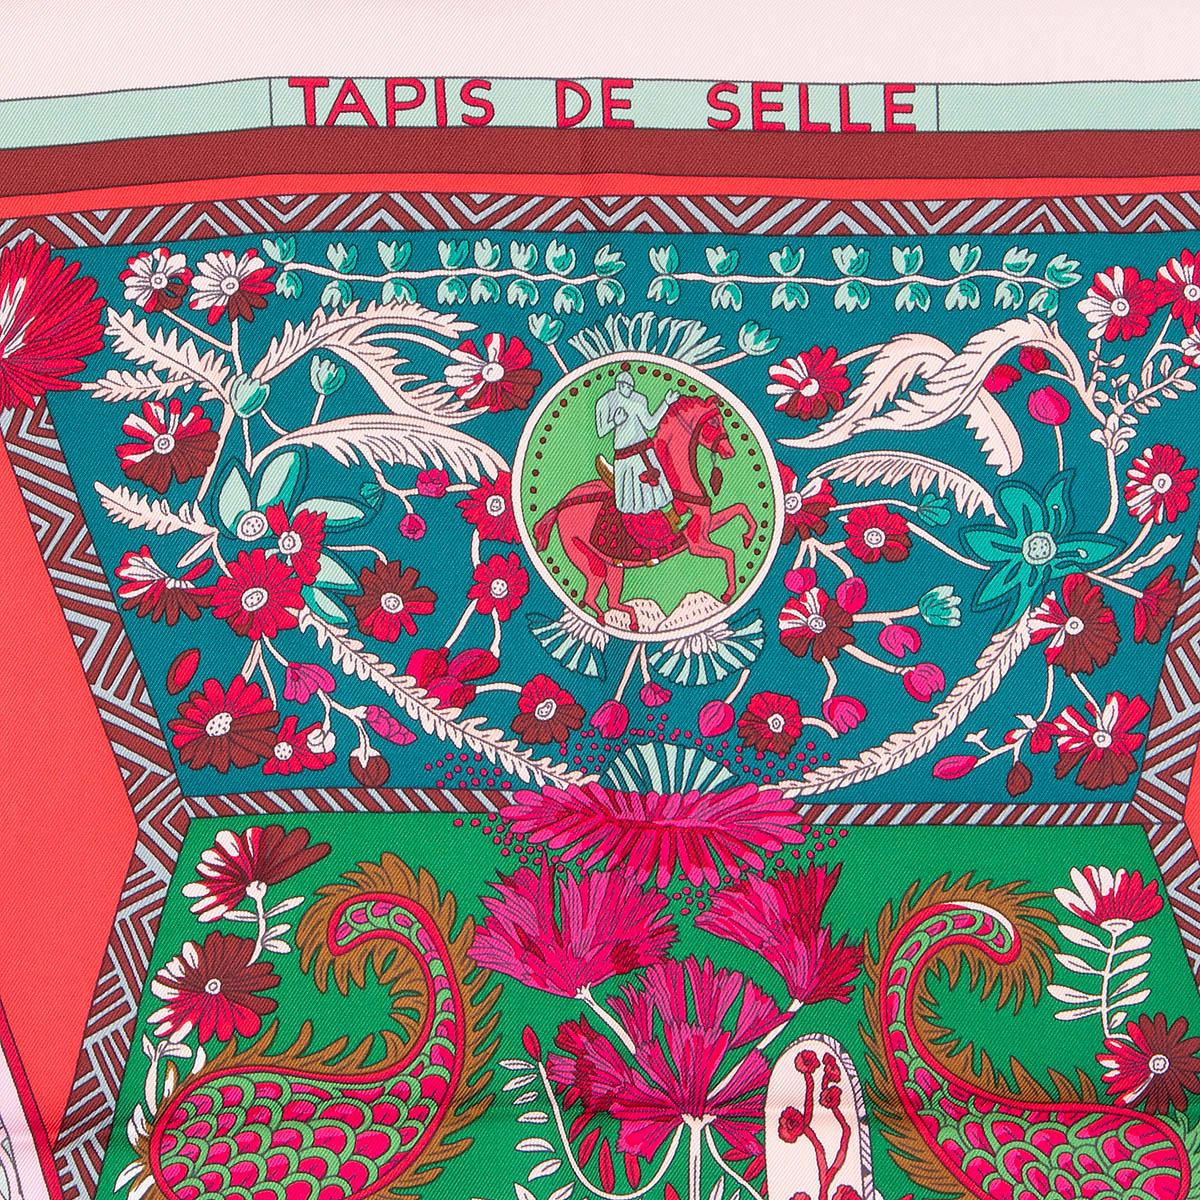 100% authentic Hermes Tapis de Selle 90 scarf by Annie Faivre in pink silk twill (100%) with details in green, burgundy and grey. Has been worn and is in excellent condition.

The story behind:
Inspired by a visit to the Émile Hermès collection,